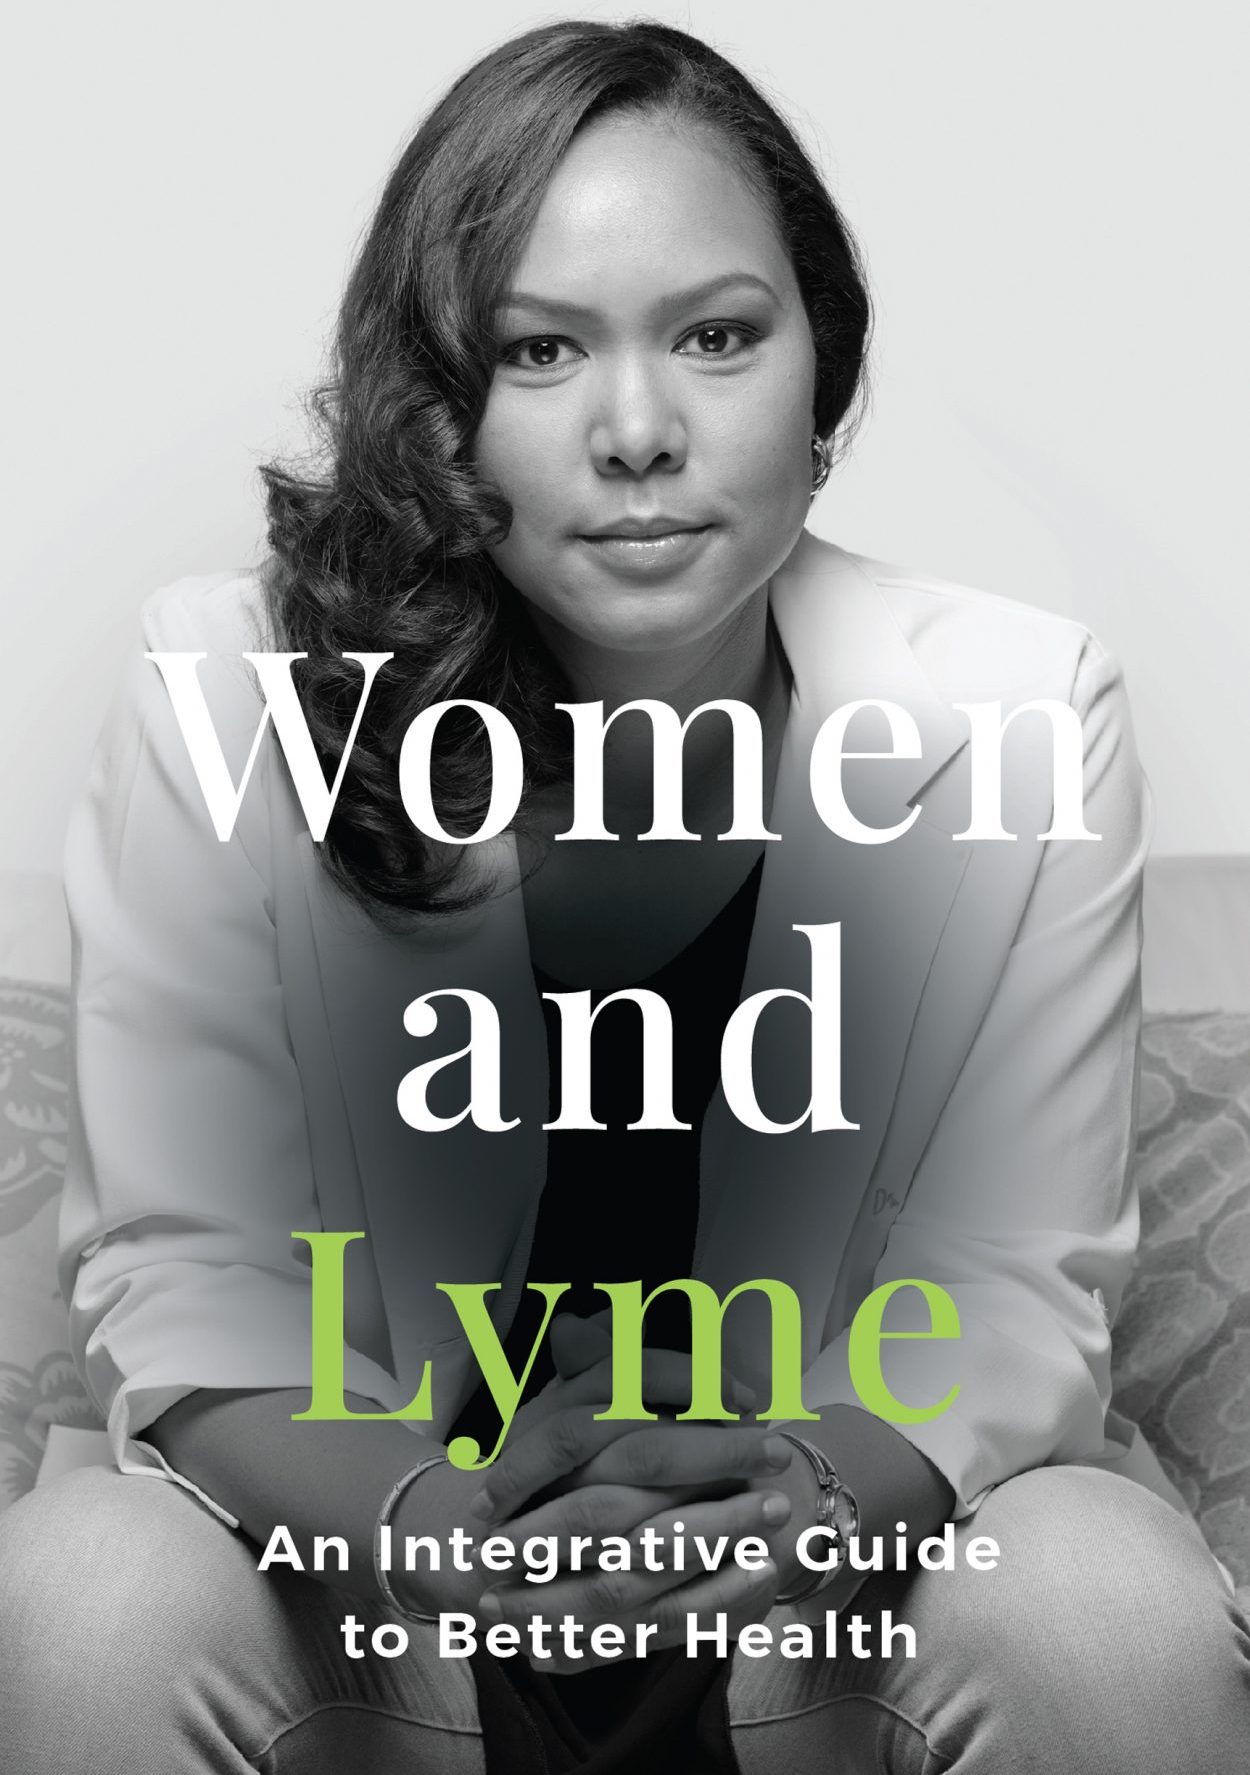 guidebook for women and lyme disease care